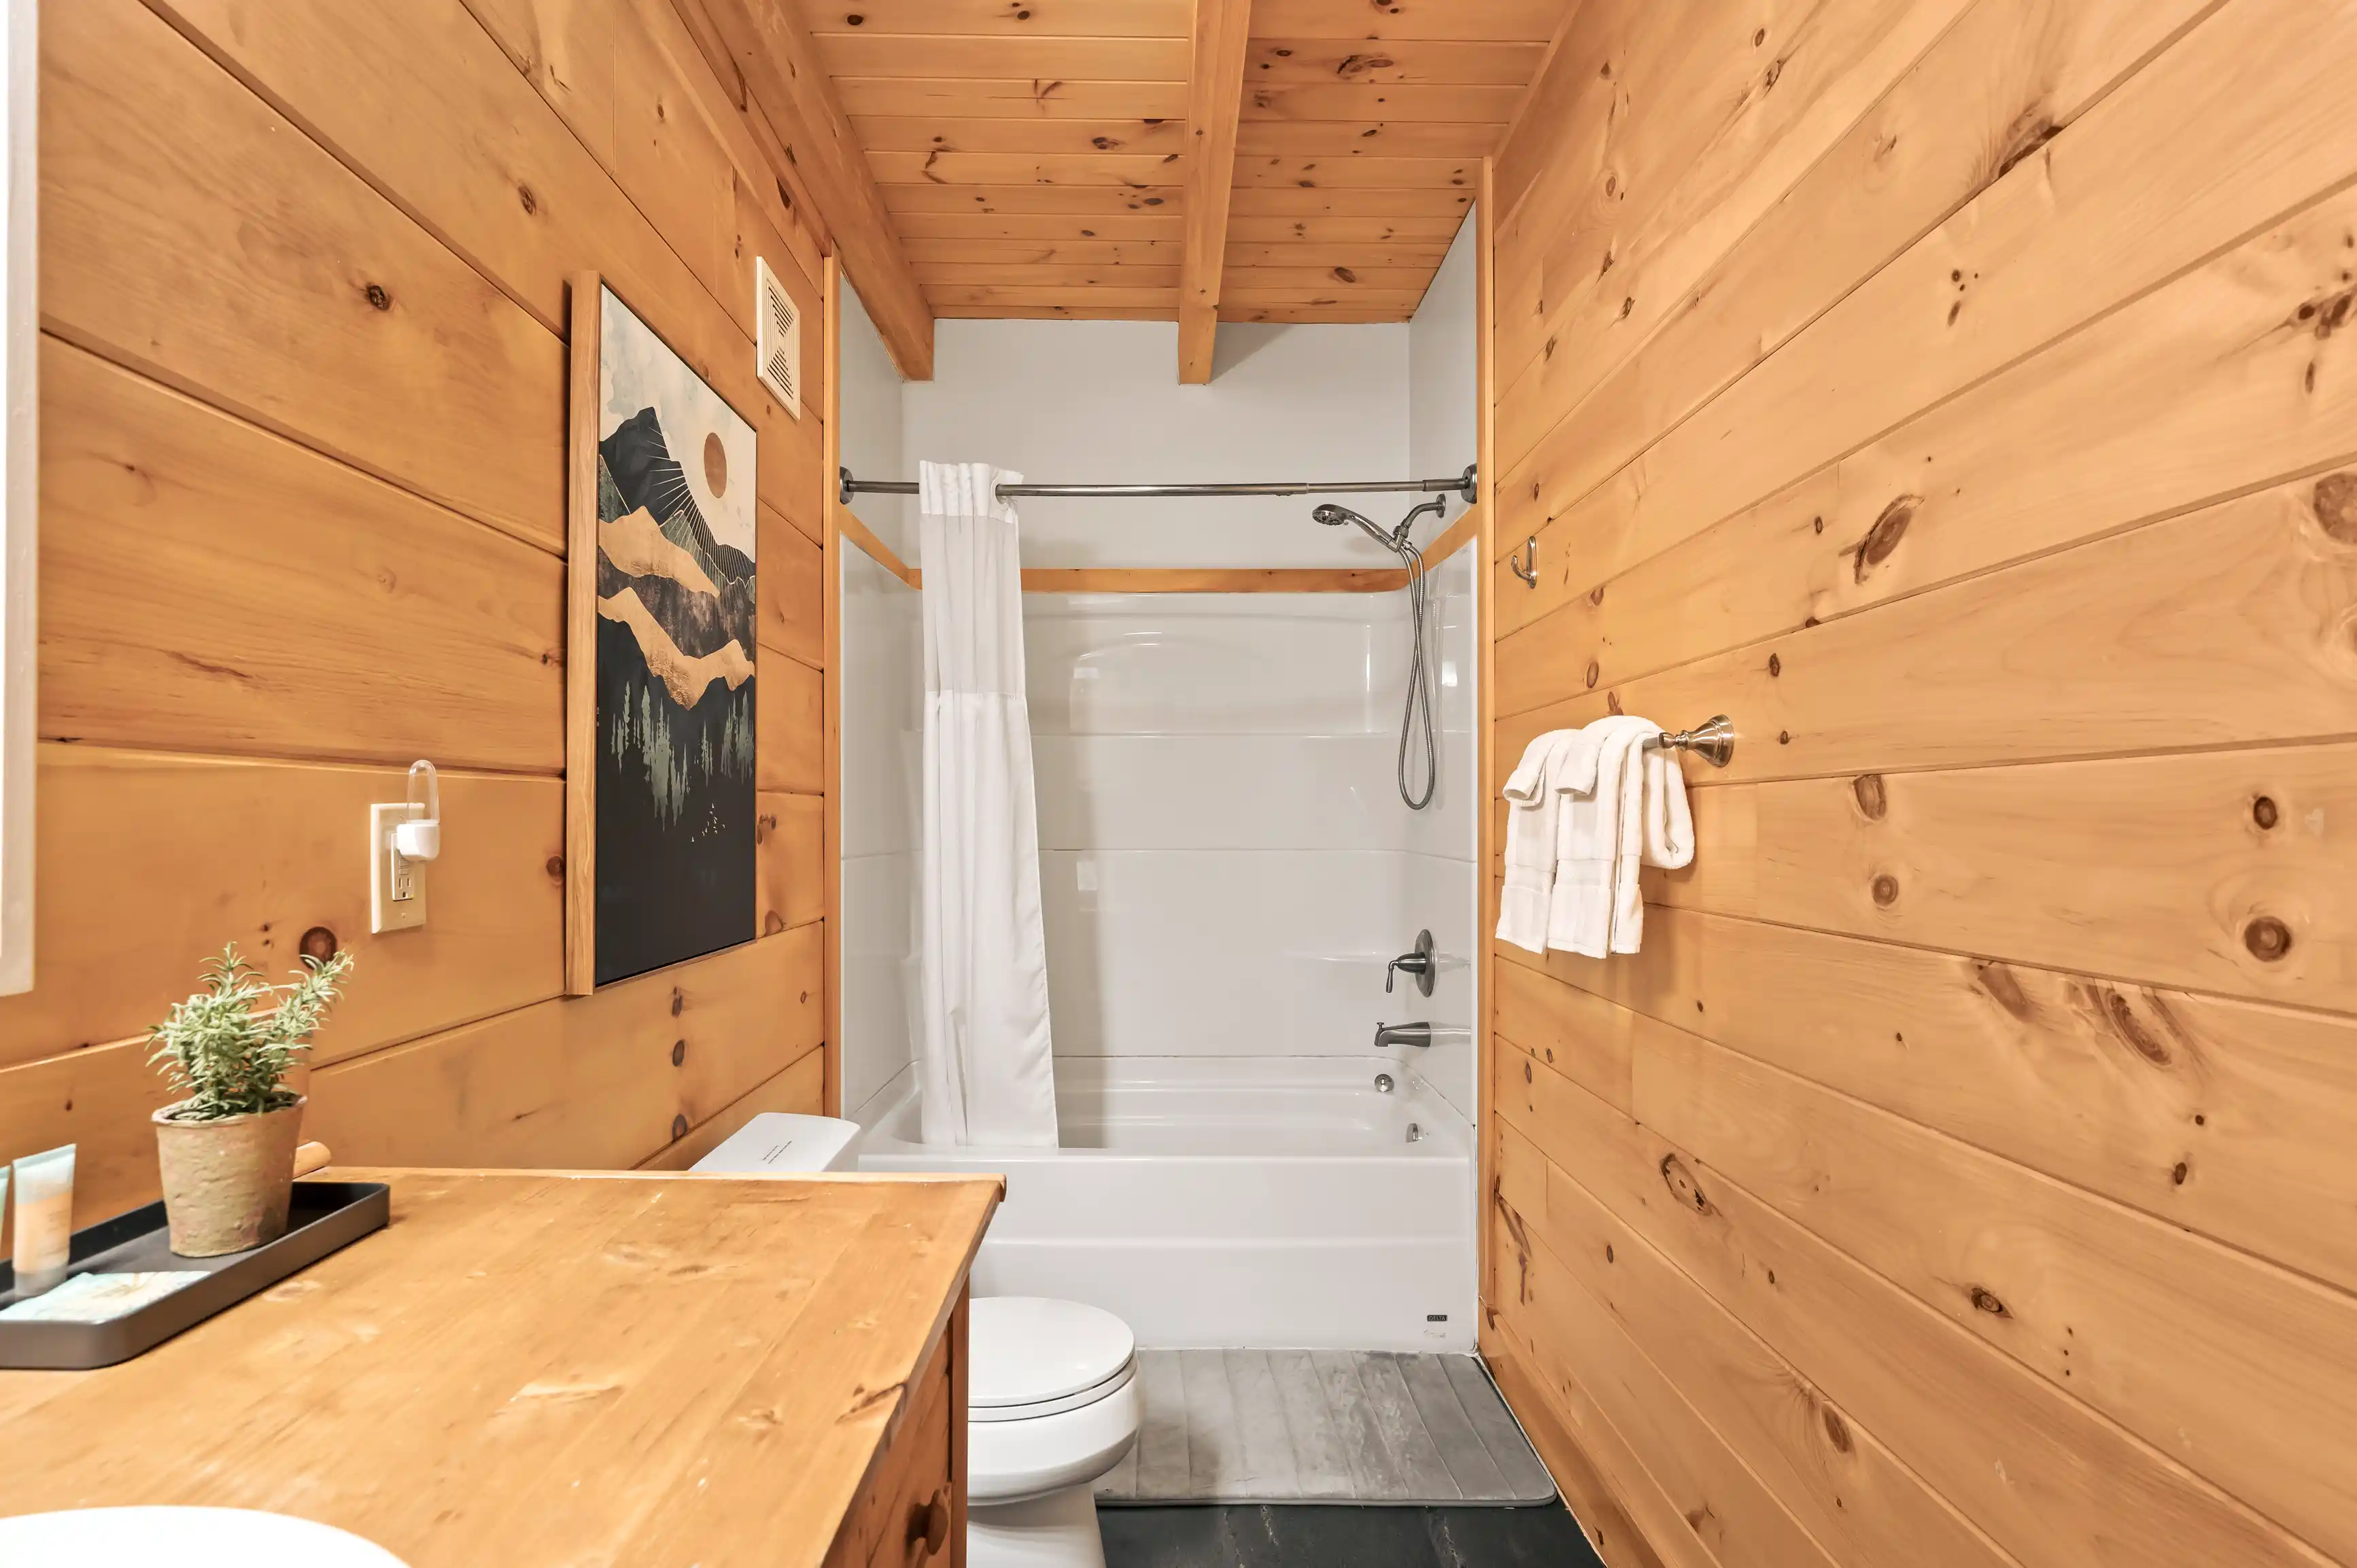 Wood-paneled bathroom interior with white ceramics, featuring a shower, toilet, and vanity, decorated with a potted plant and a mountain-themed wall art.